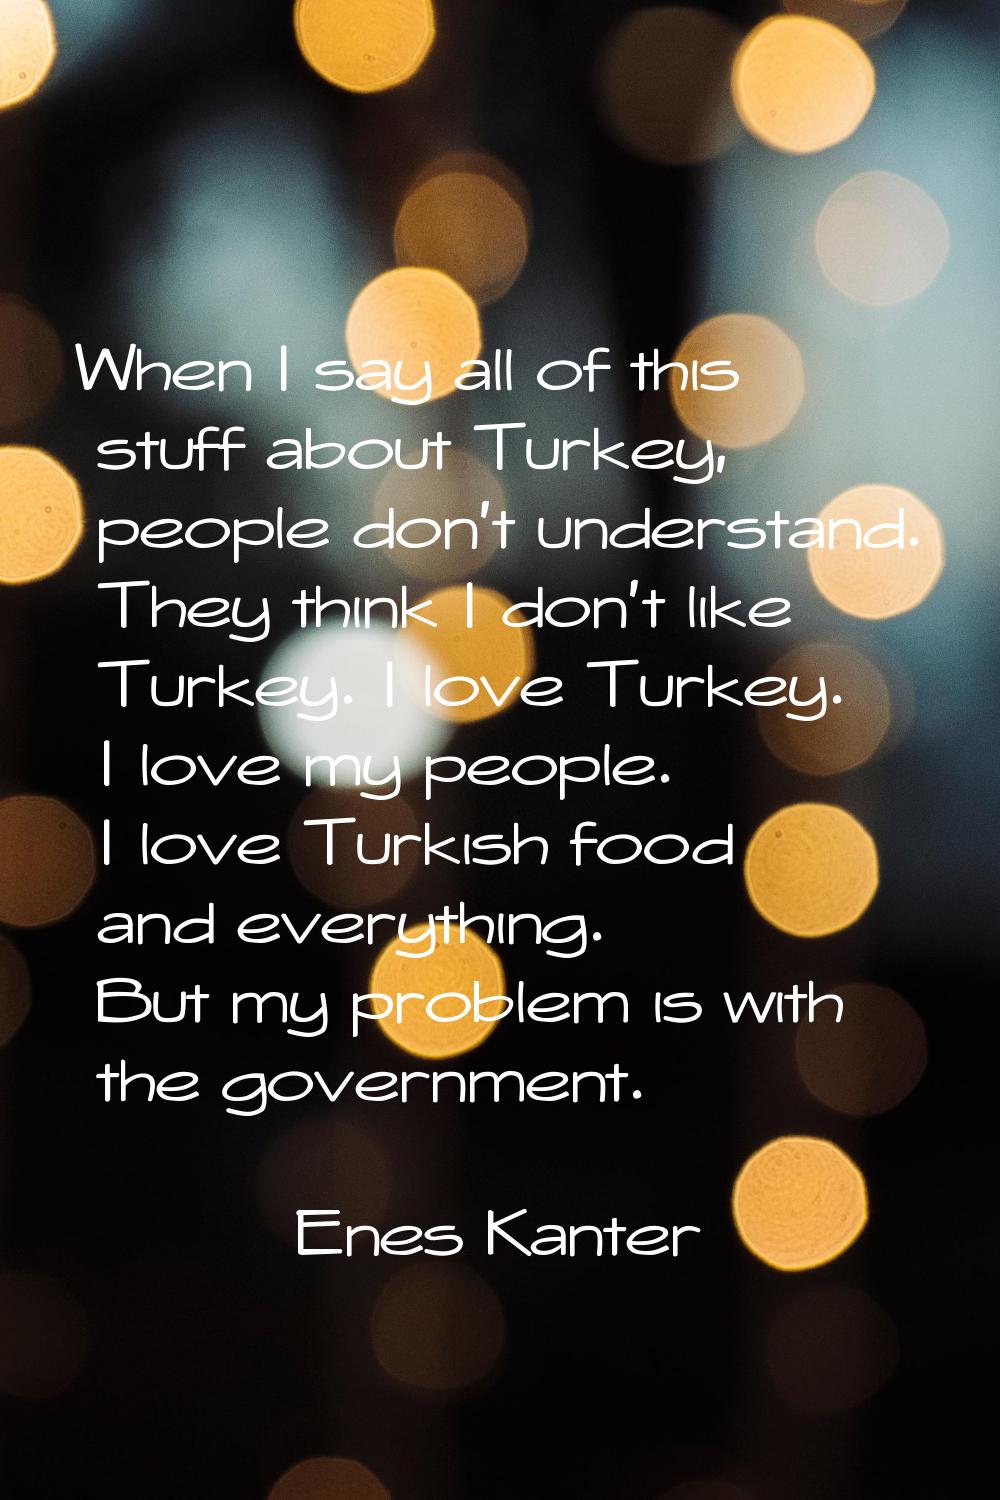 When I say all of this stuff about Turkey, people don't understand. They think I don't like Turkey.